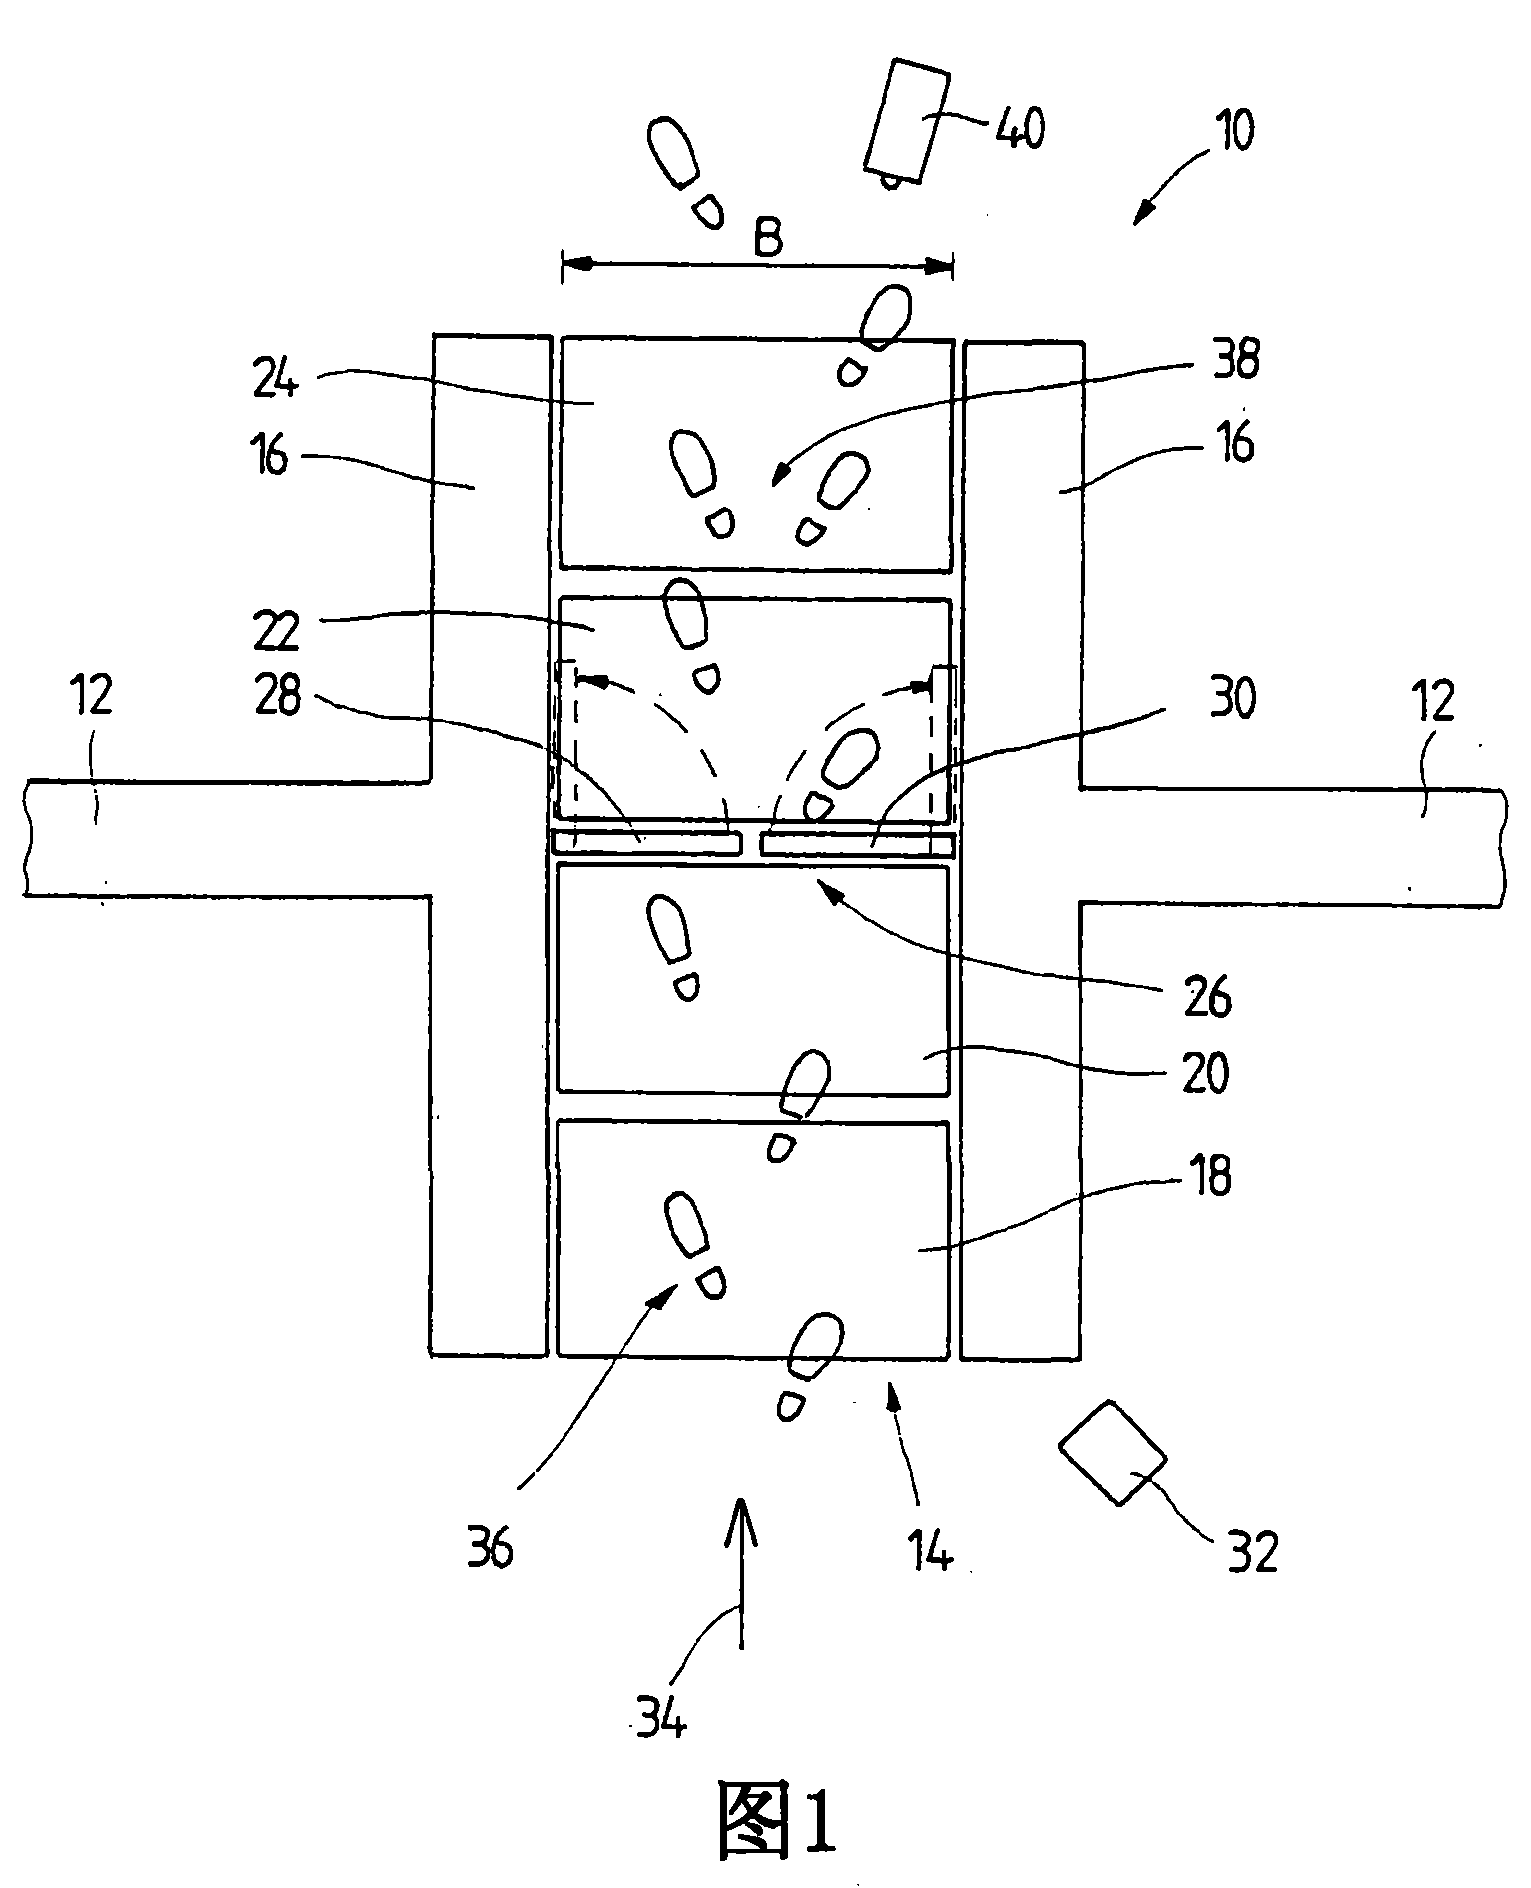 Method for automatically ascertaining the number of people and/or objects present in a gate